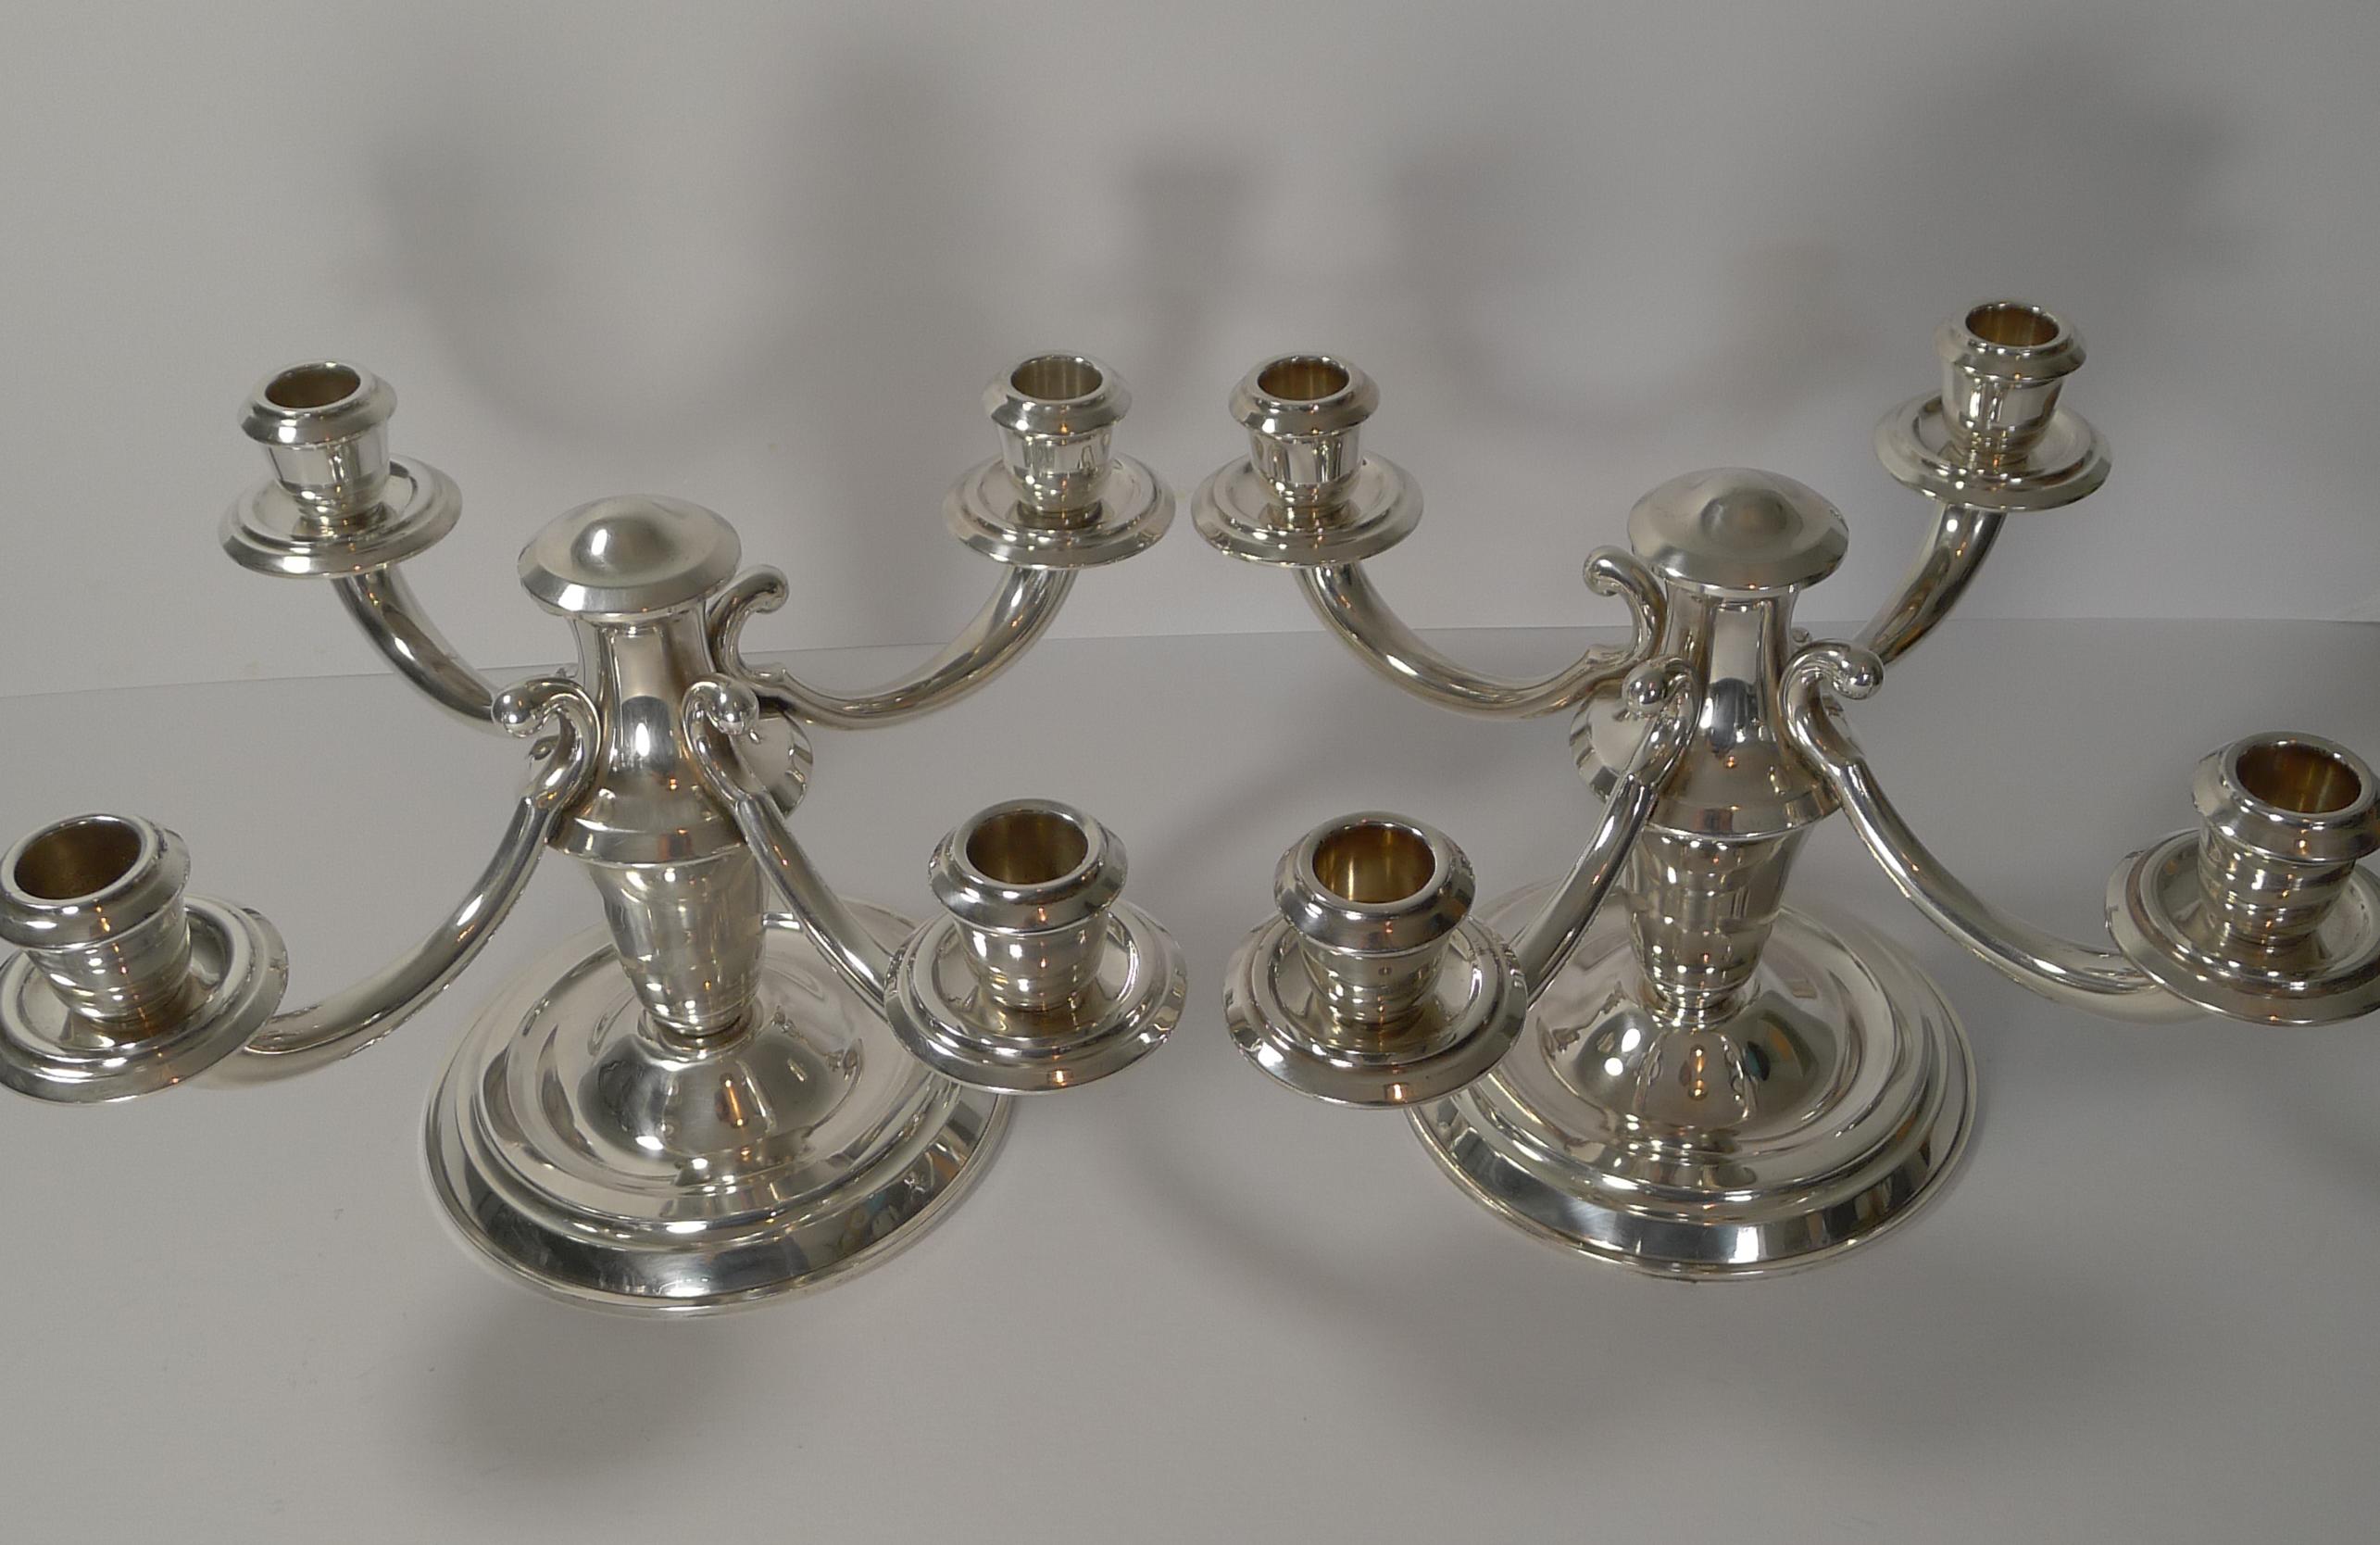 Pair of French Art Deco Candelabra in Silver Plate by Ravinet d'Enfert 4